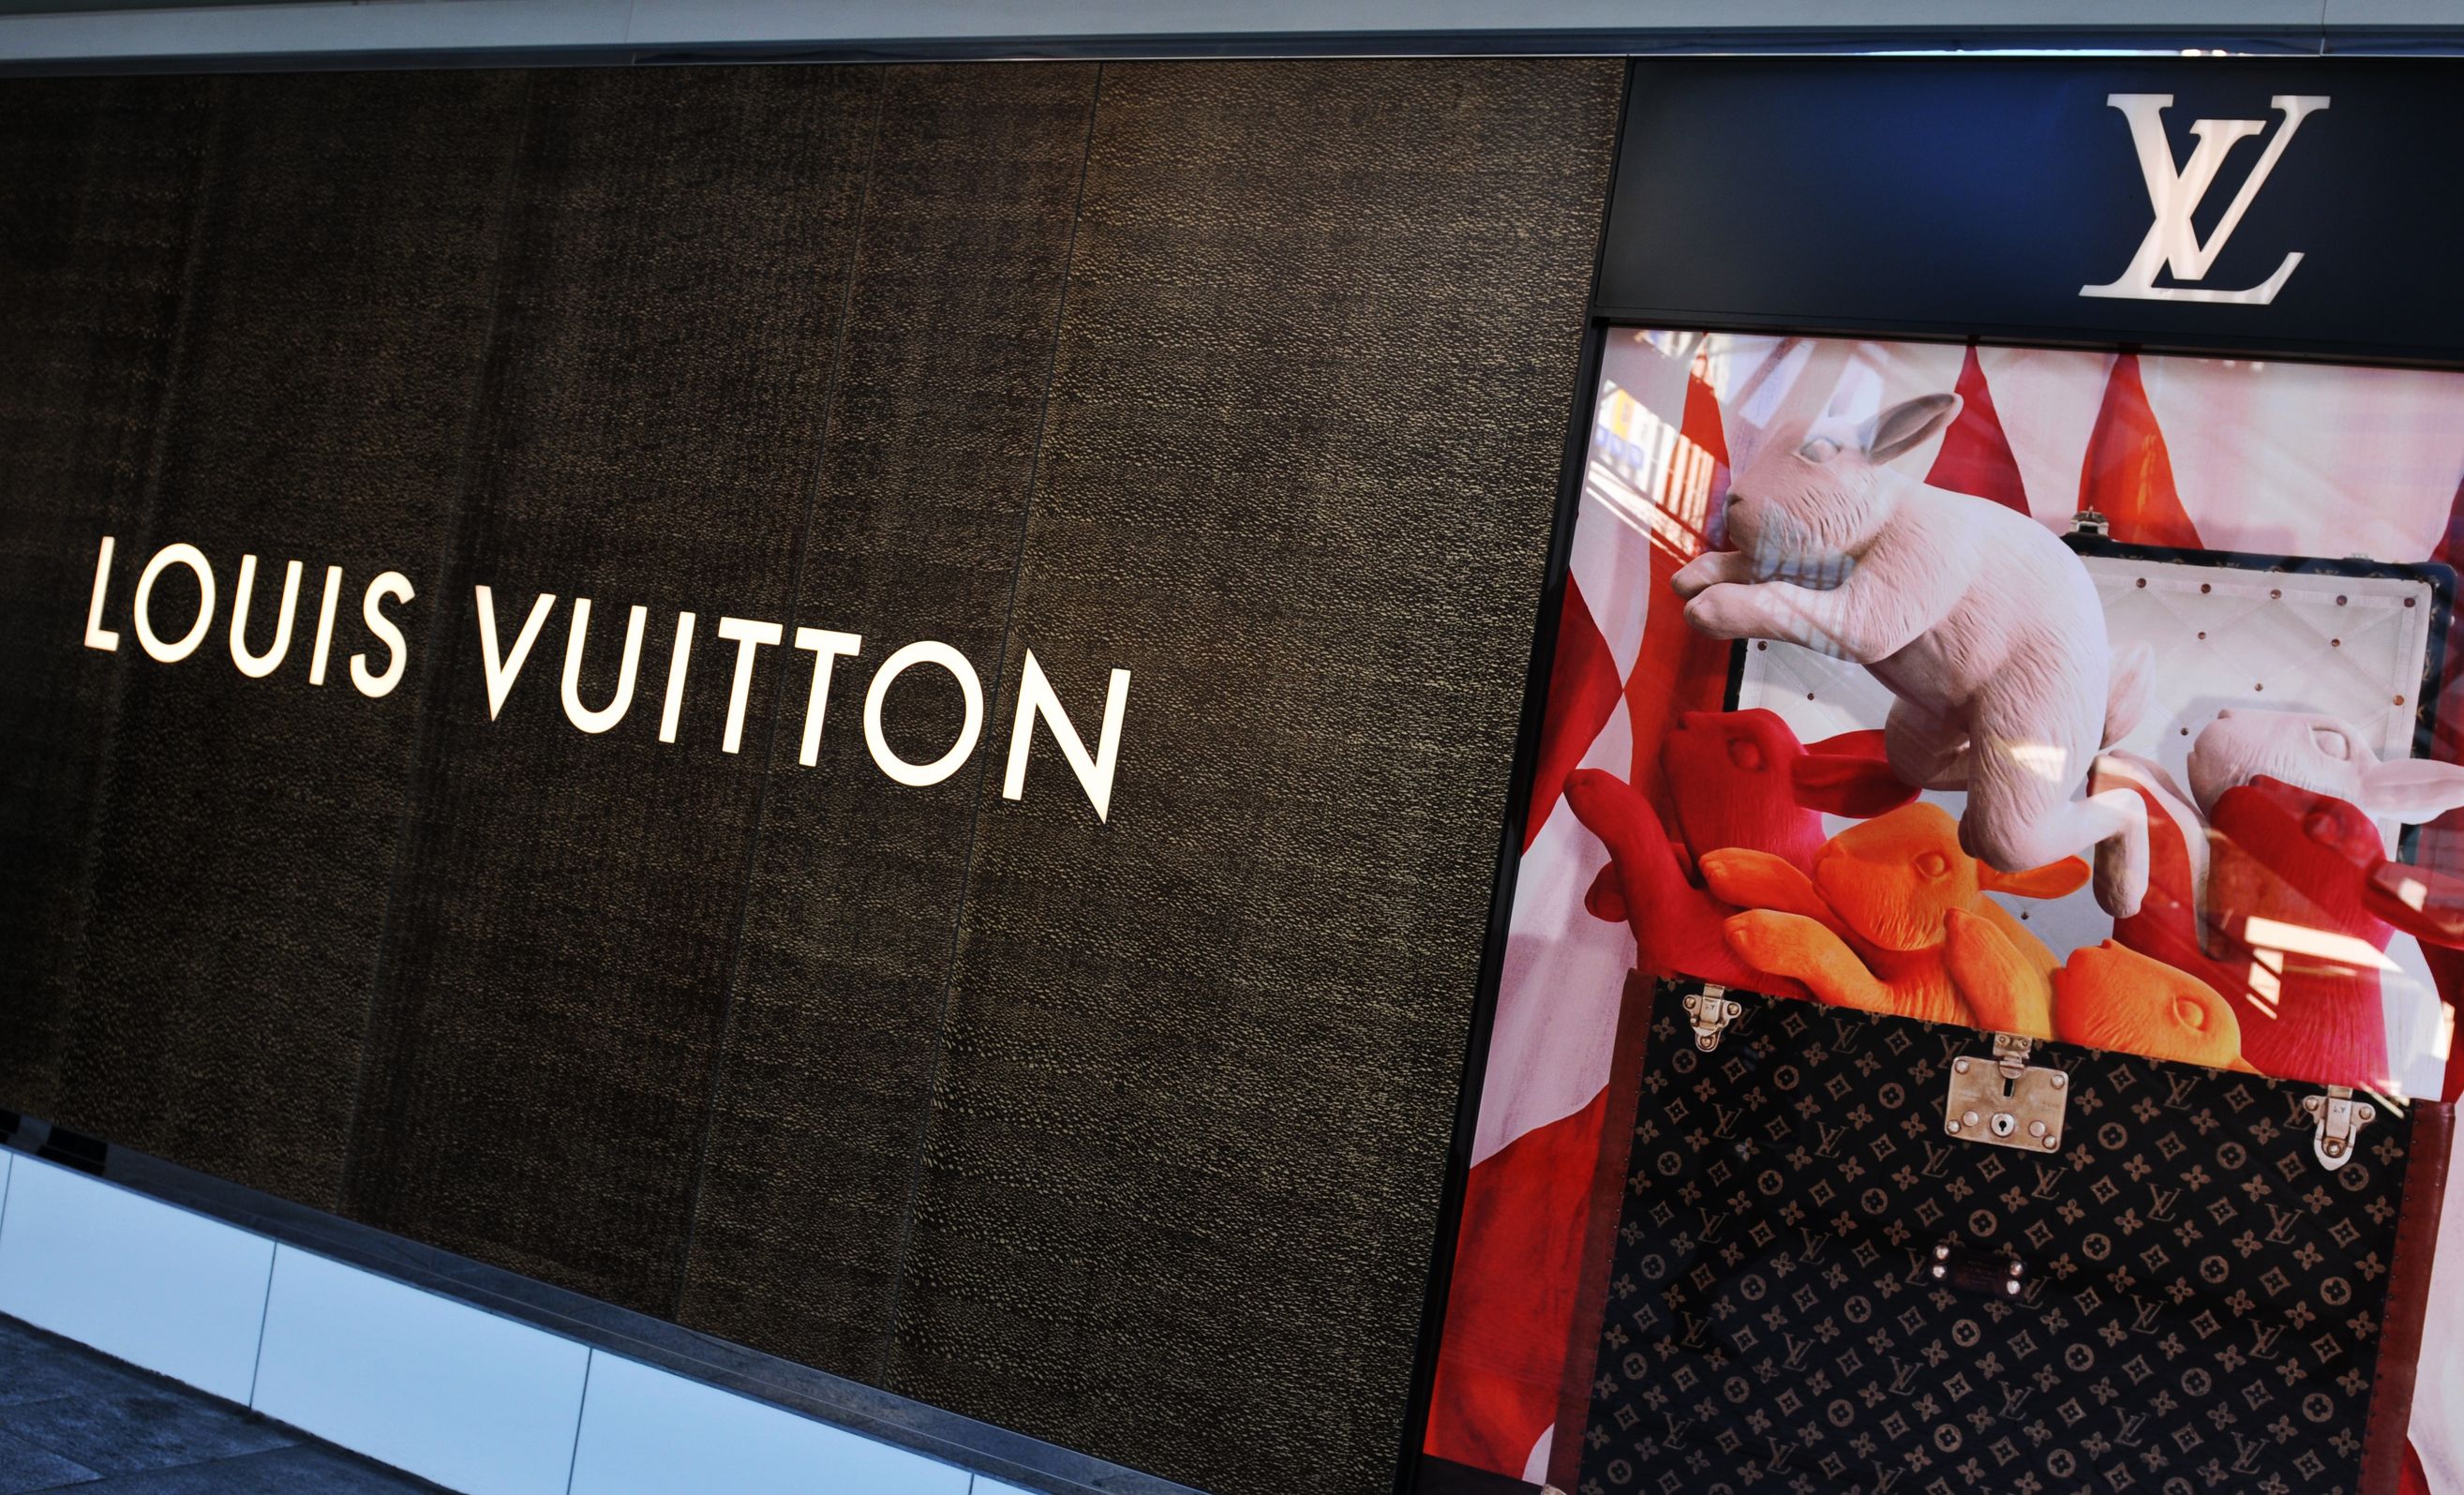 Marketing Mind on X: Why is Louis Vuitton so expensive? : #Marketingmind # LouisVuitton  / X